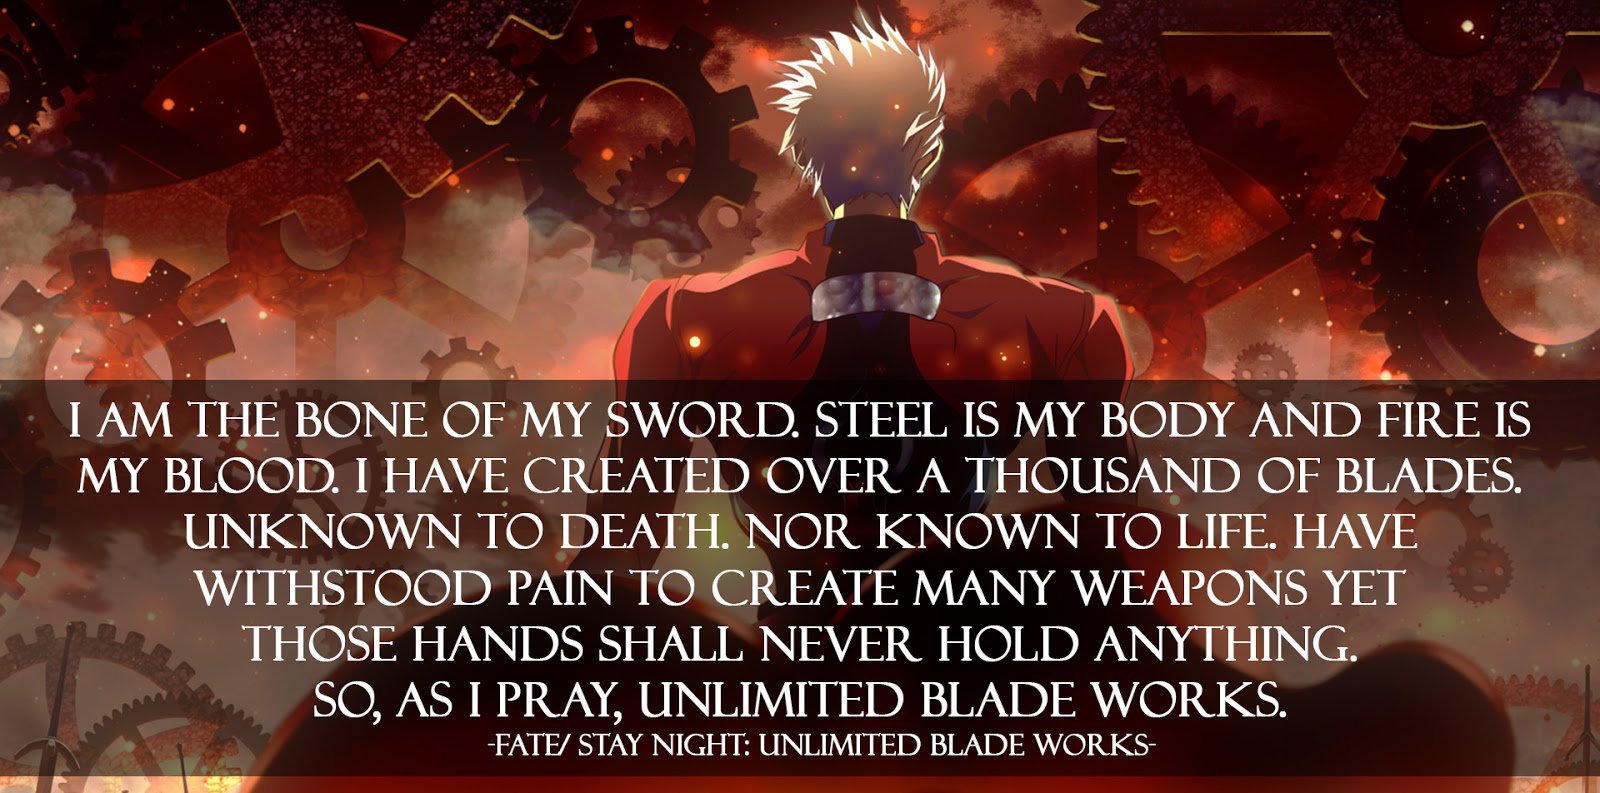 Fate/ stay night: unlimited blade work.